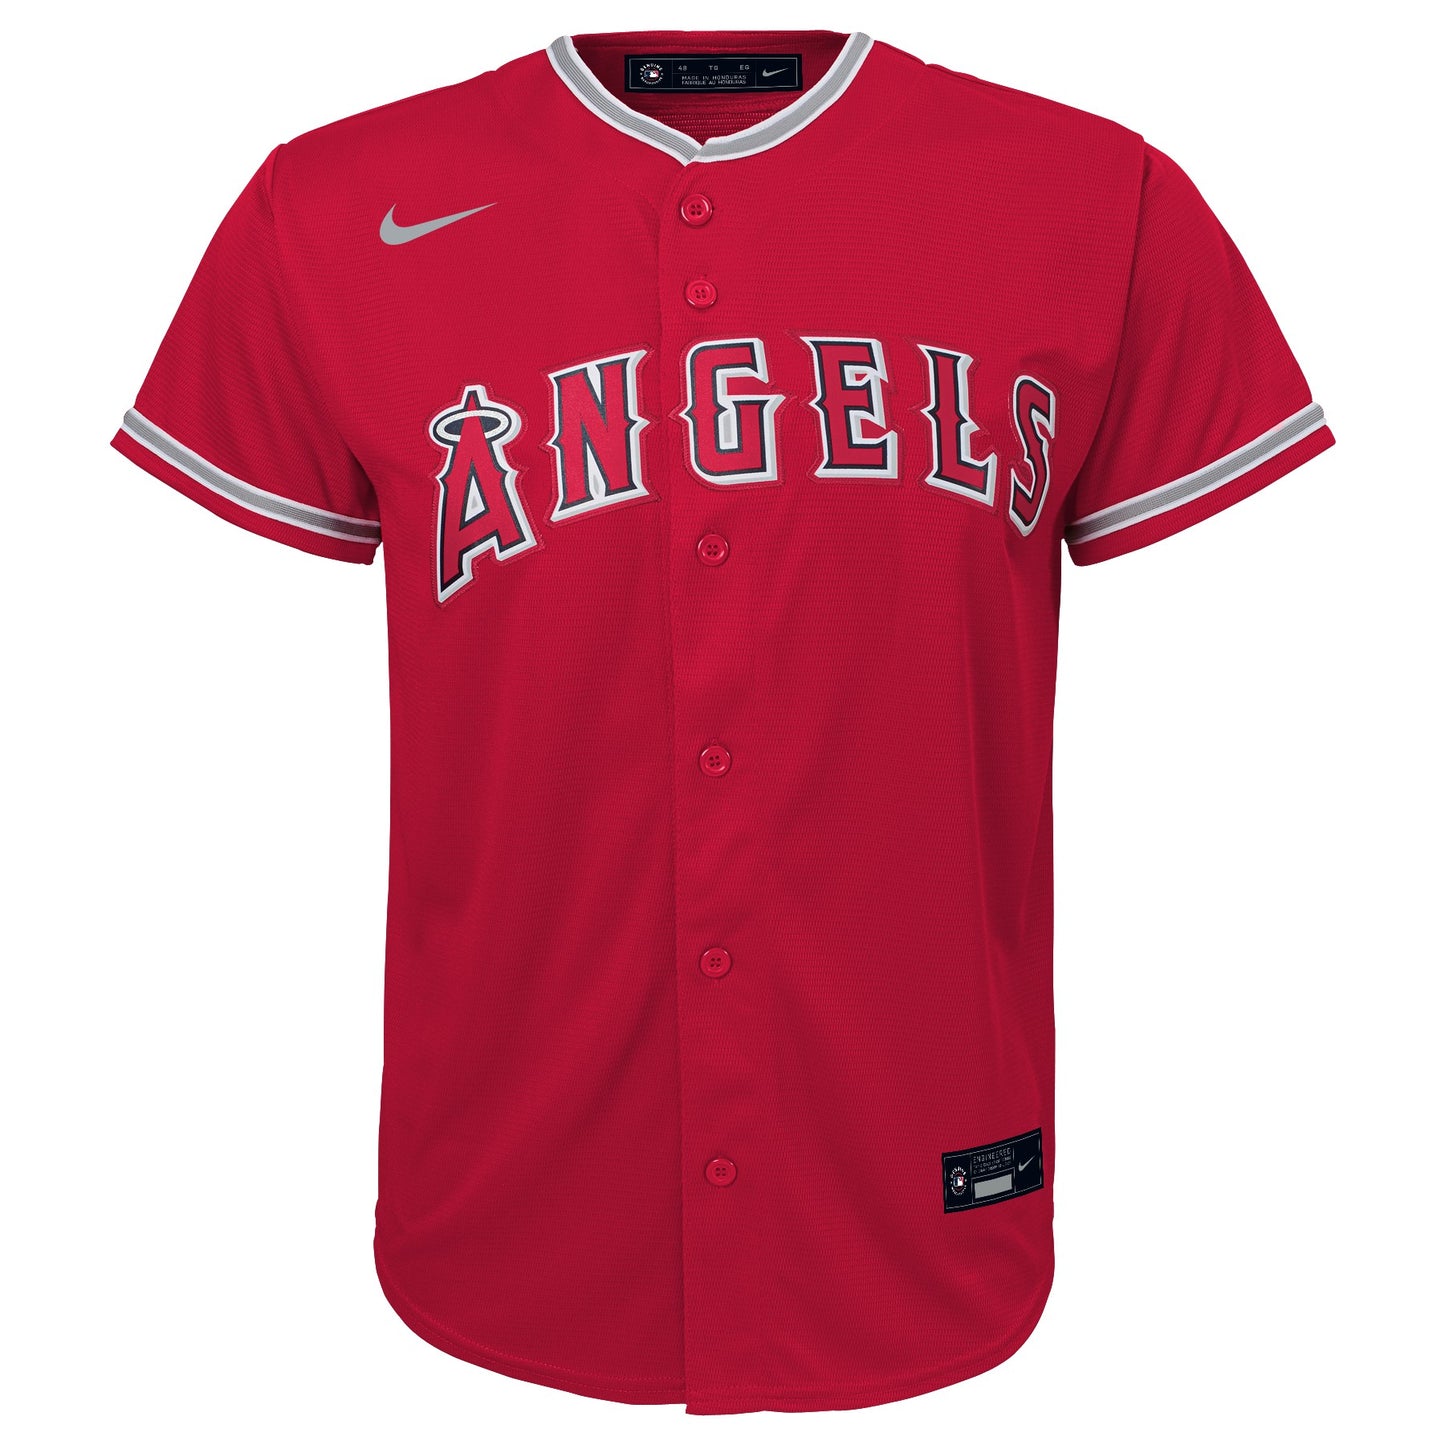 Preschool Mike Trout Los Angeles Angels Nike Red Child Replica Team Jersey